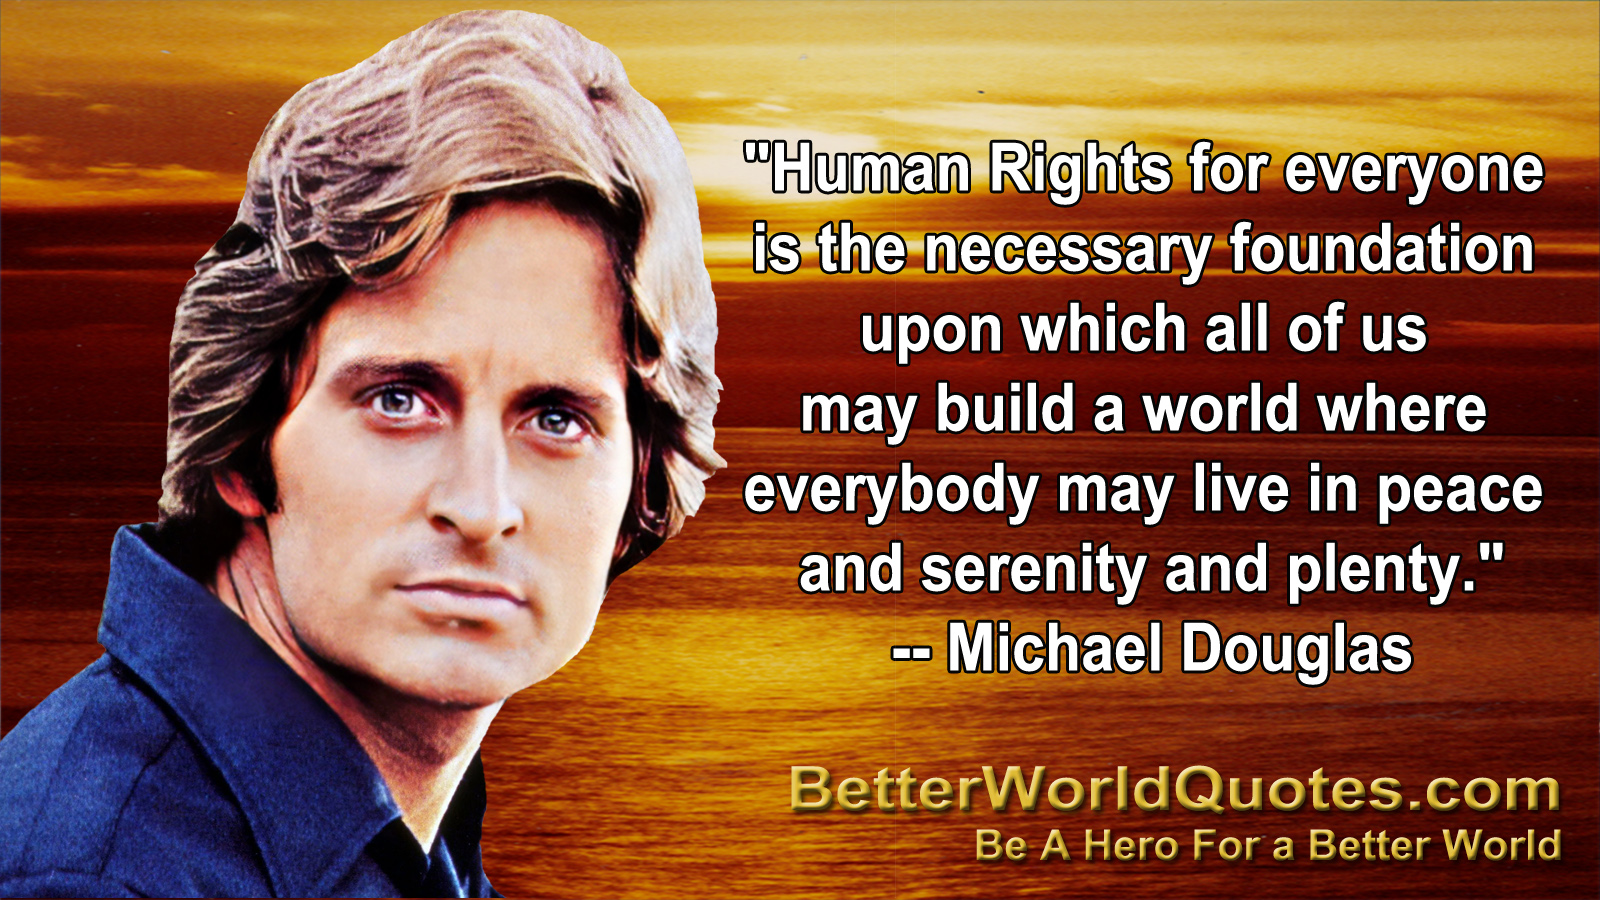 "Human Rights for everyone is the necessary foundation upon 
                          which all of us may build a world where everybody may 
                          live in peace and serenity and plenty." -- Michael Douglas